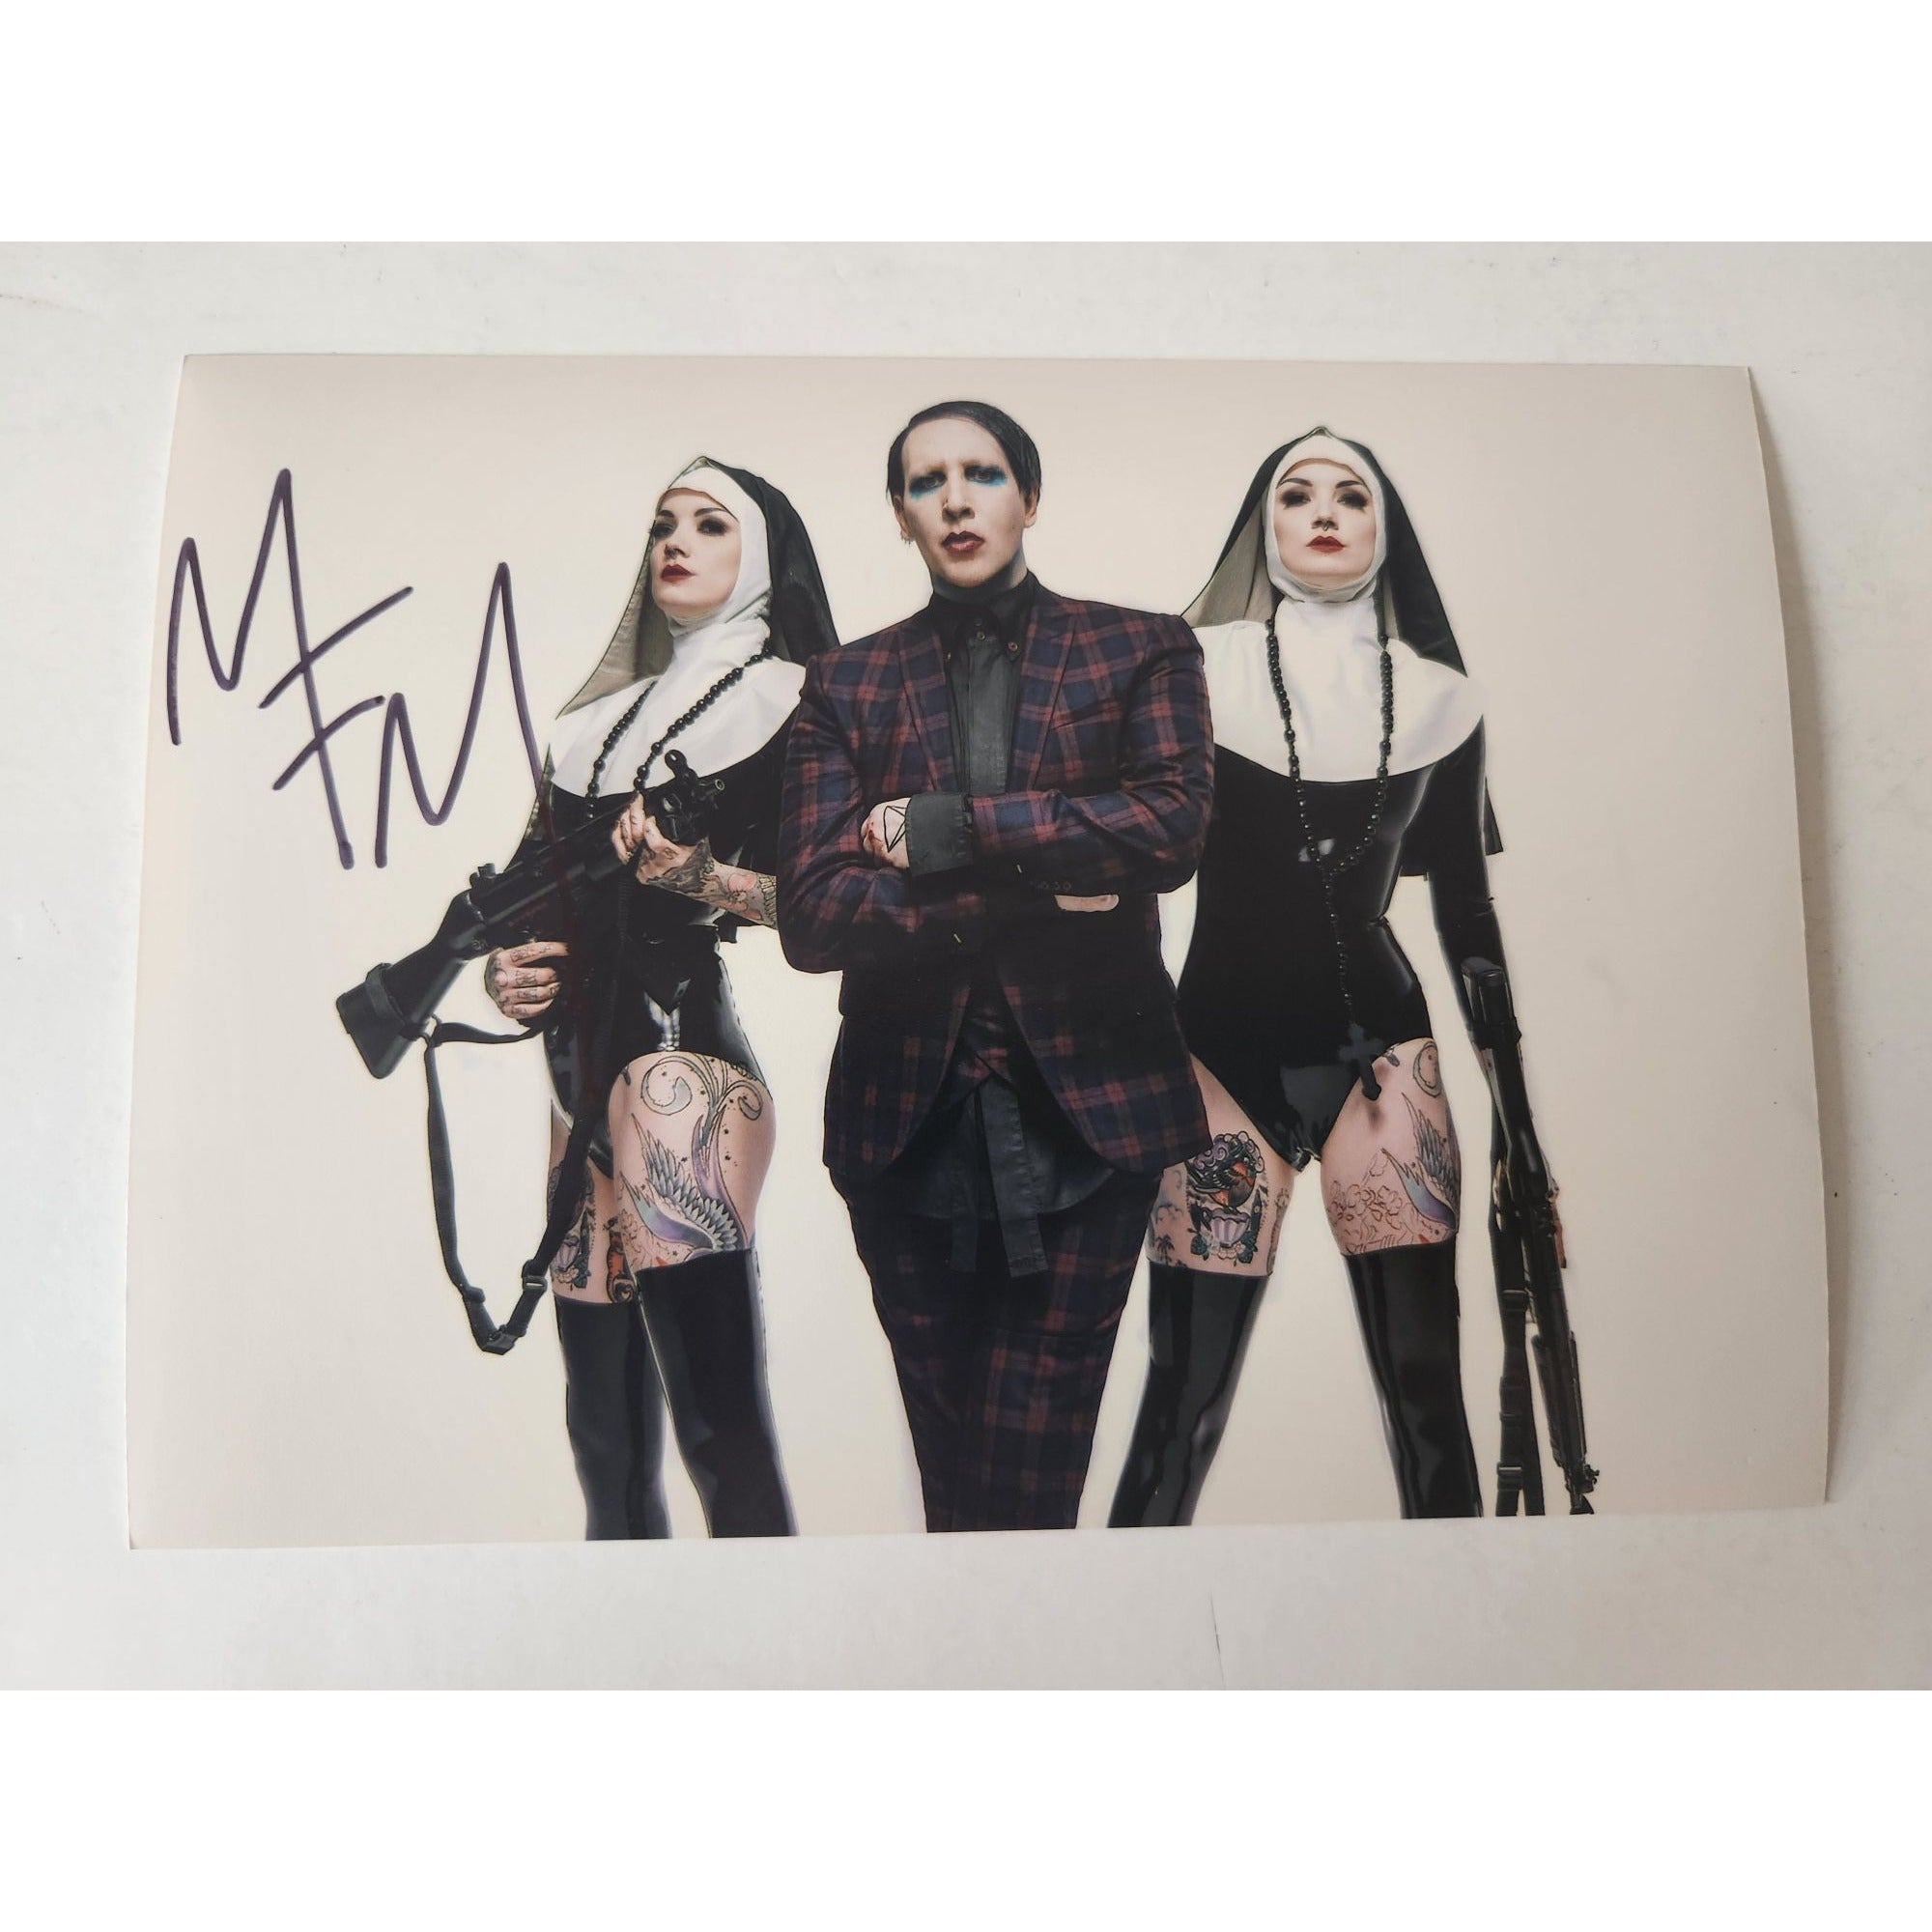 Marilyn Manson 5x7 photo signed with proof